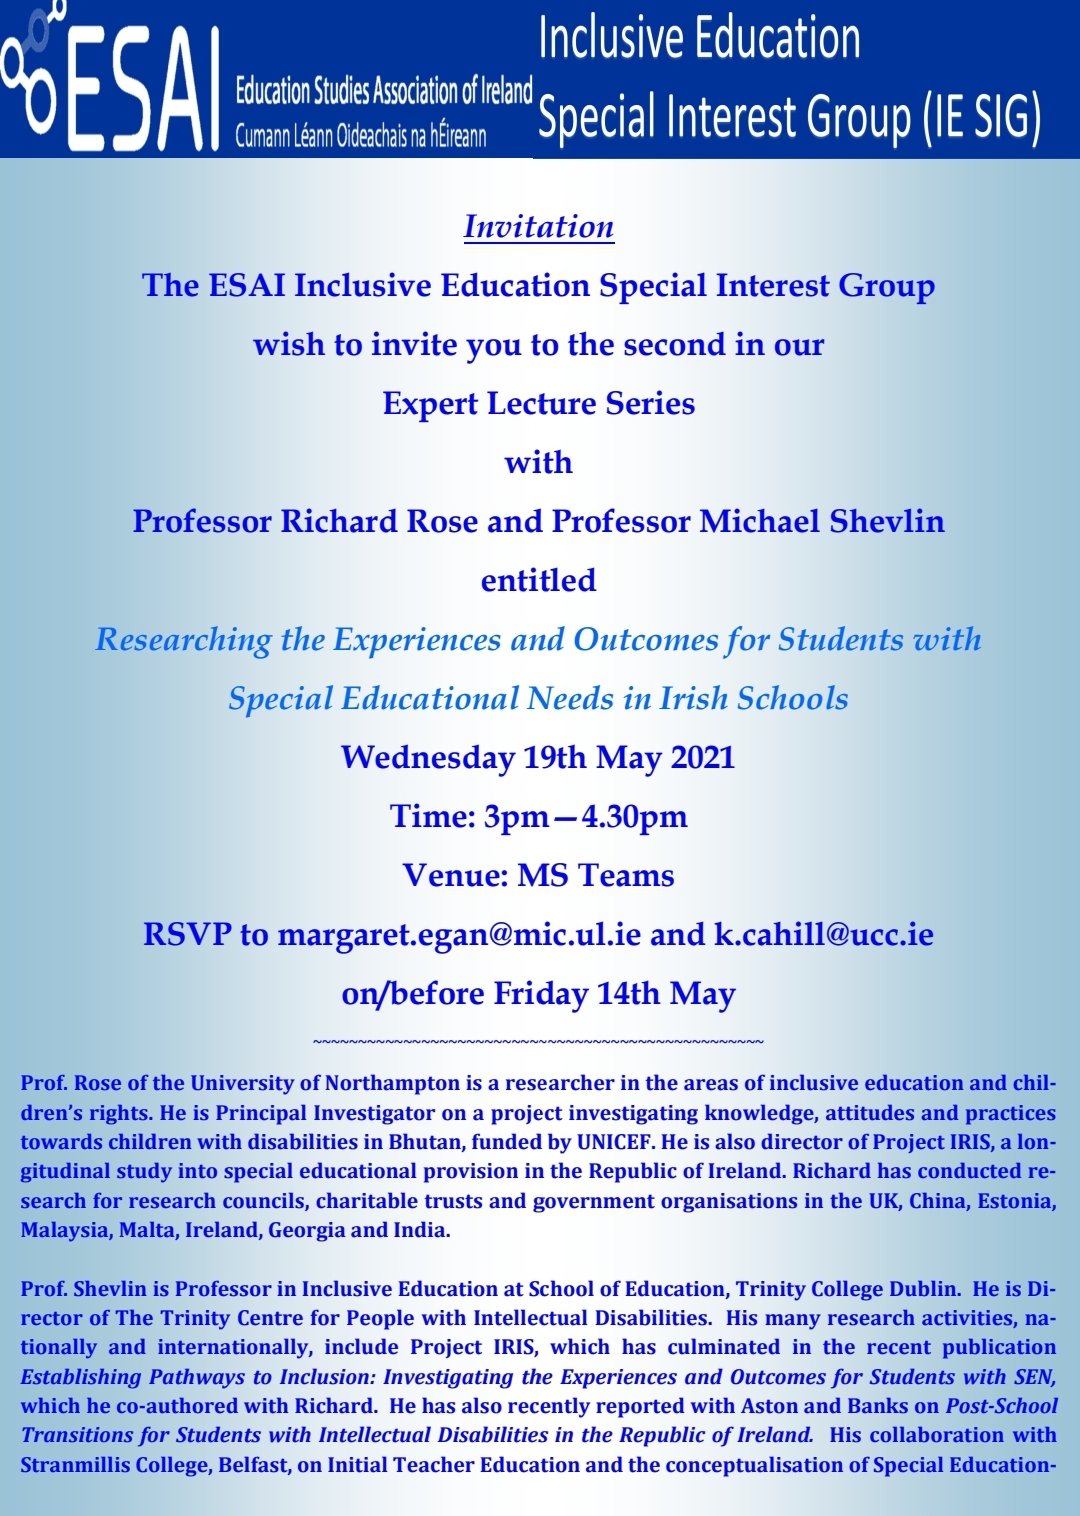 ESAI Inclusive Education Special Interest Group: Expert Lecture Series